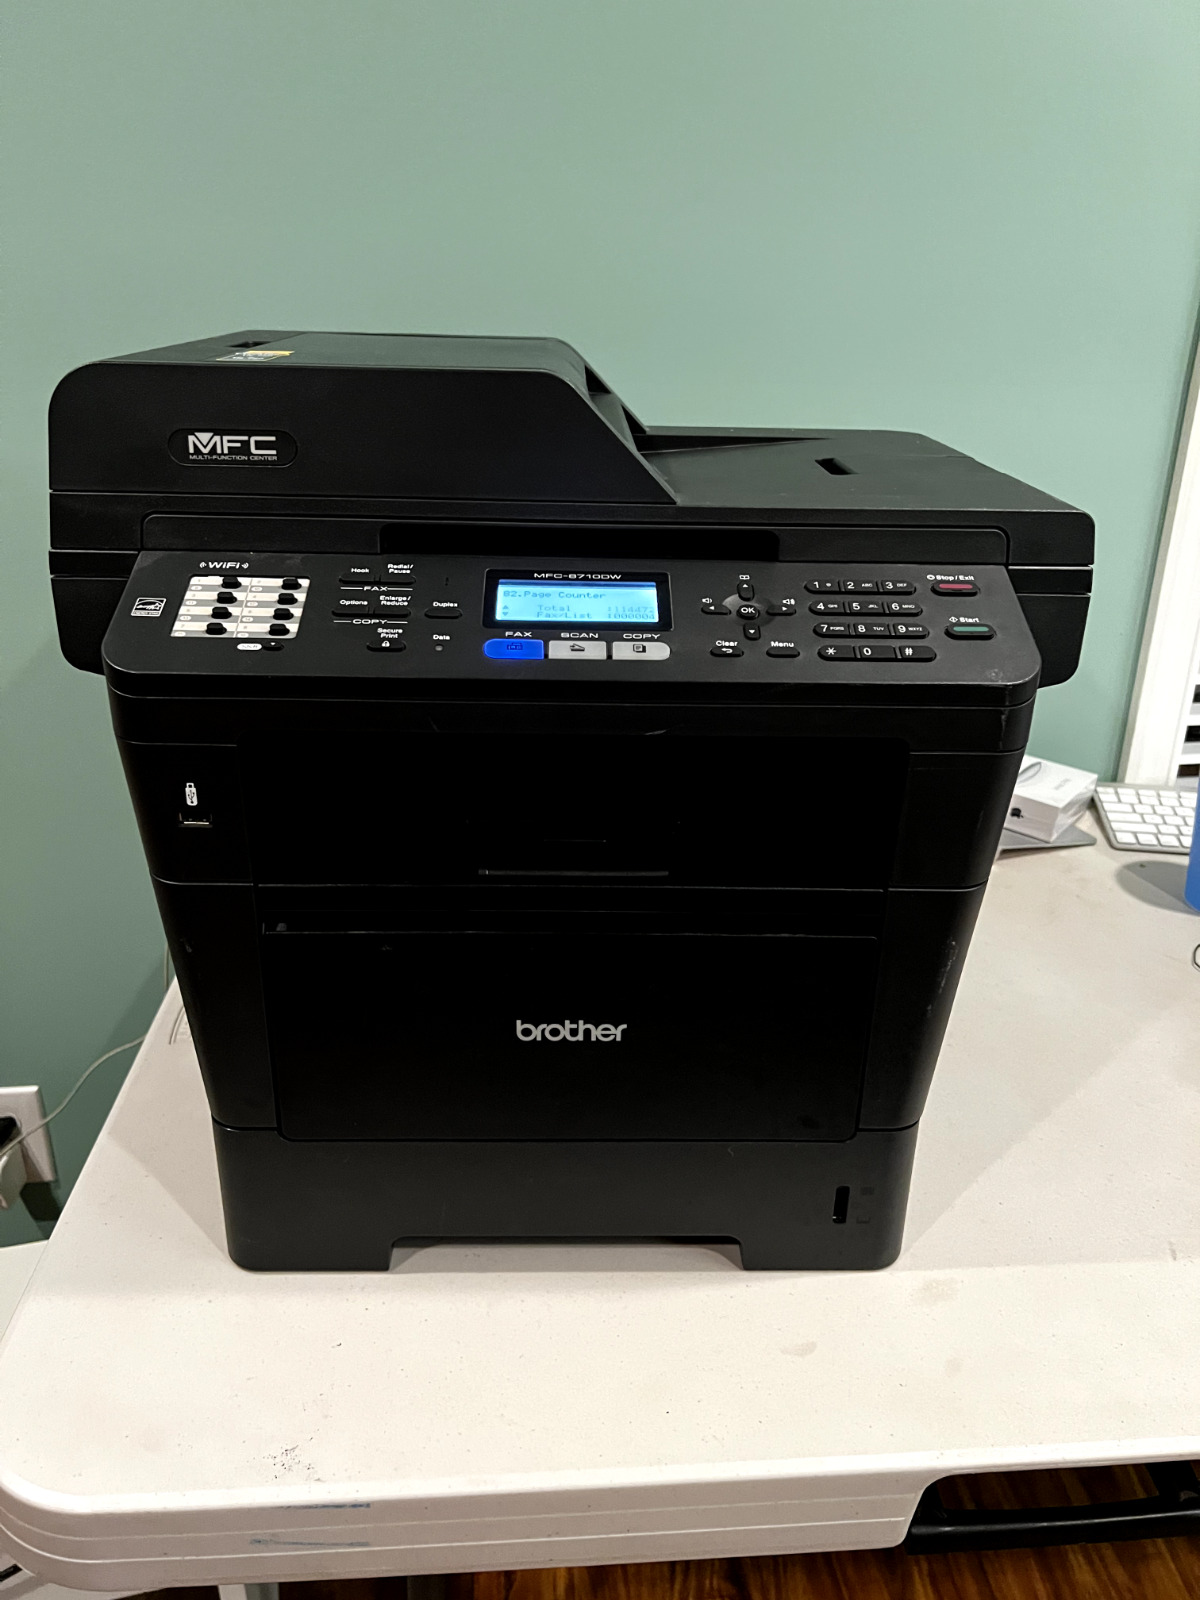 TESTED AND WORKING Brother MFC-8710DW All-In-One Laser Printer